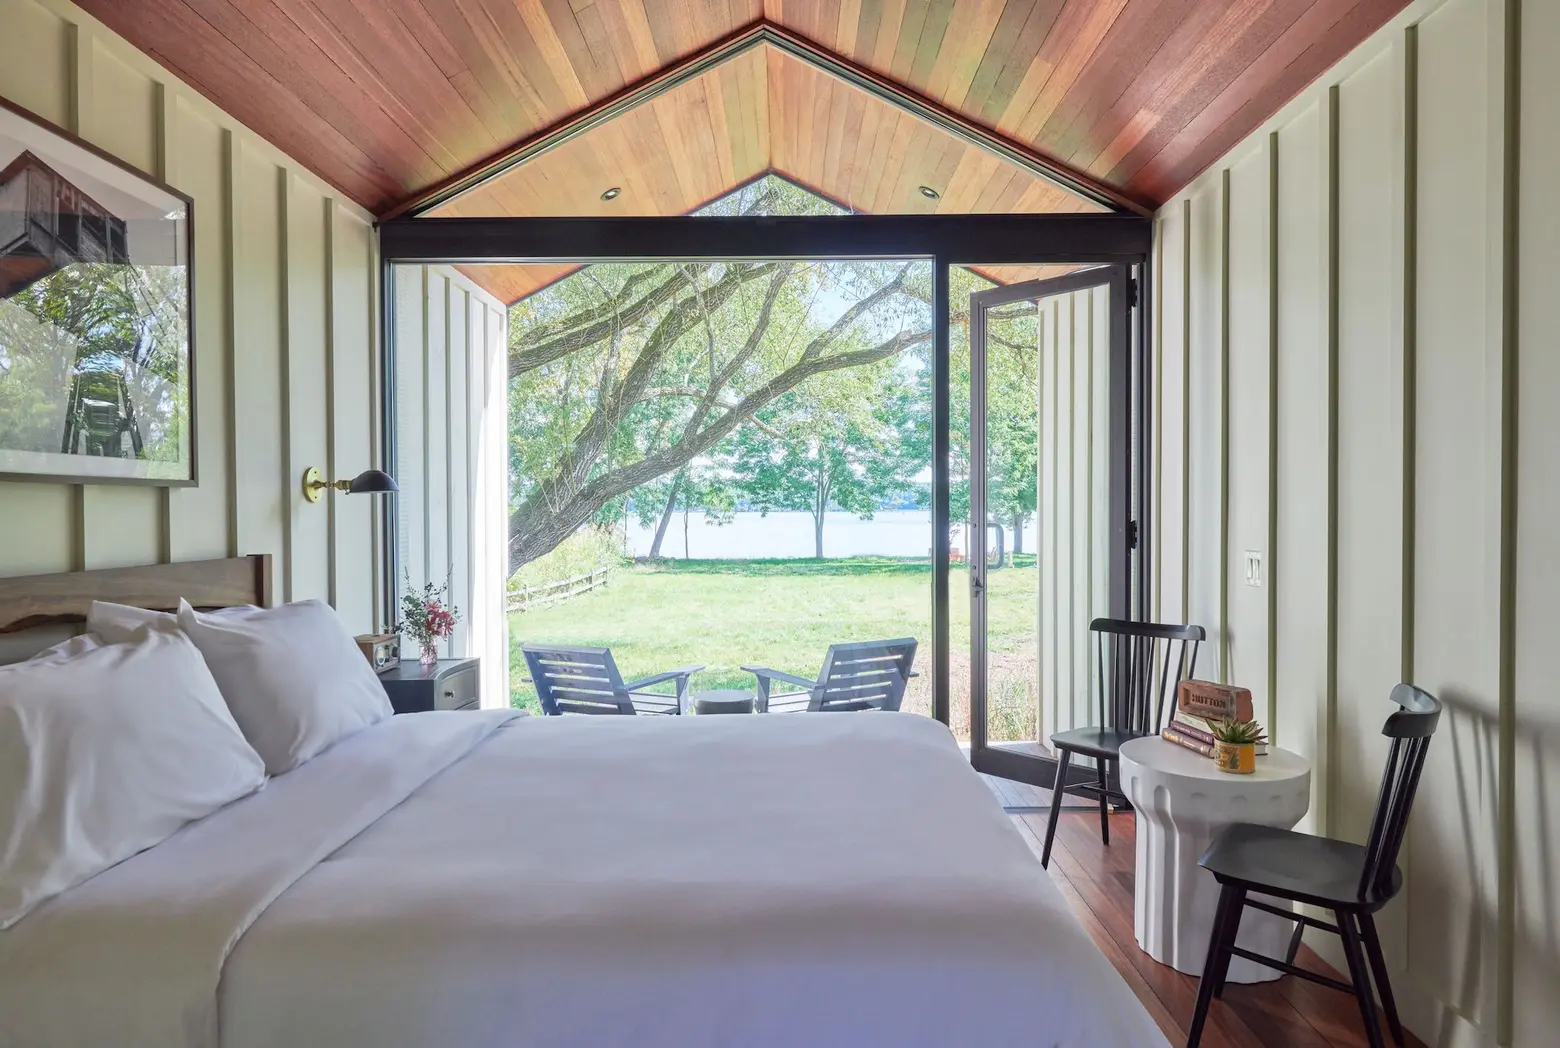 A former brickyard in Kingston is now luxury hotel cabins on the Hudson River